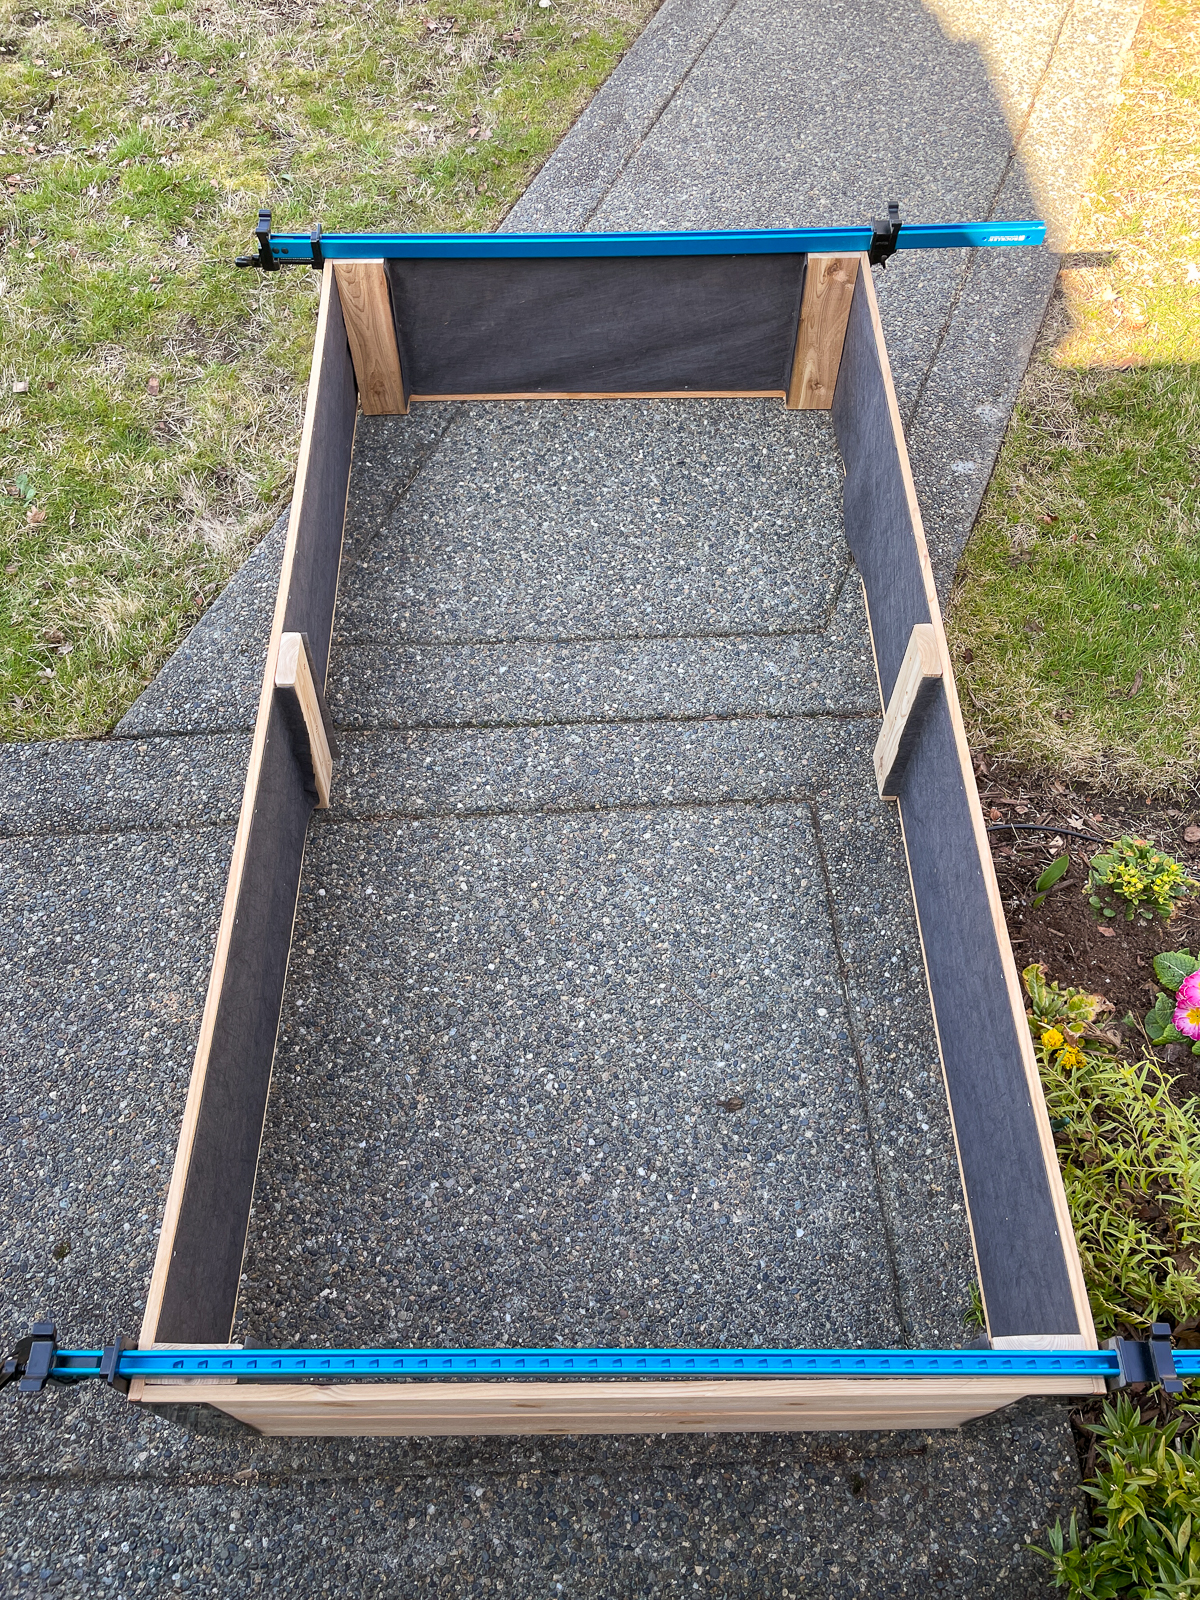 DIY raised garden bed held together with long clamps